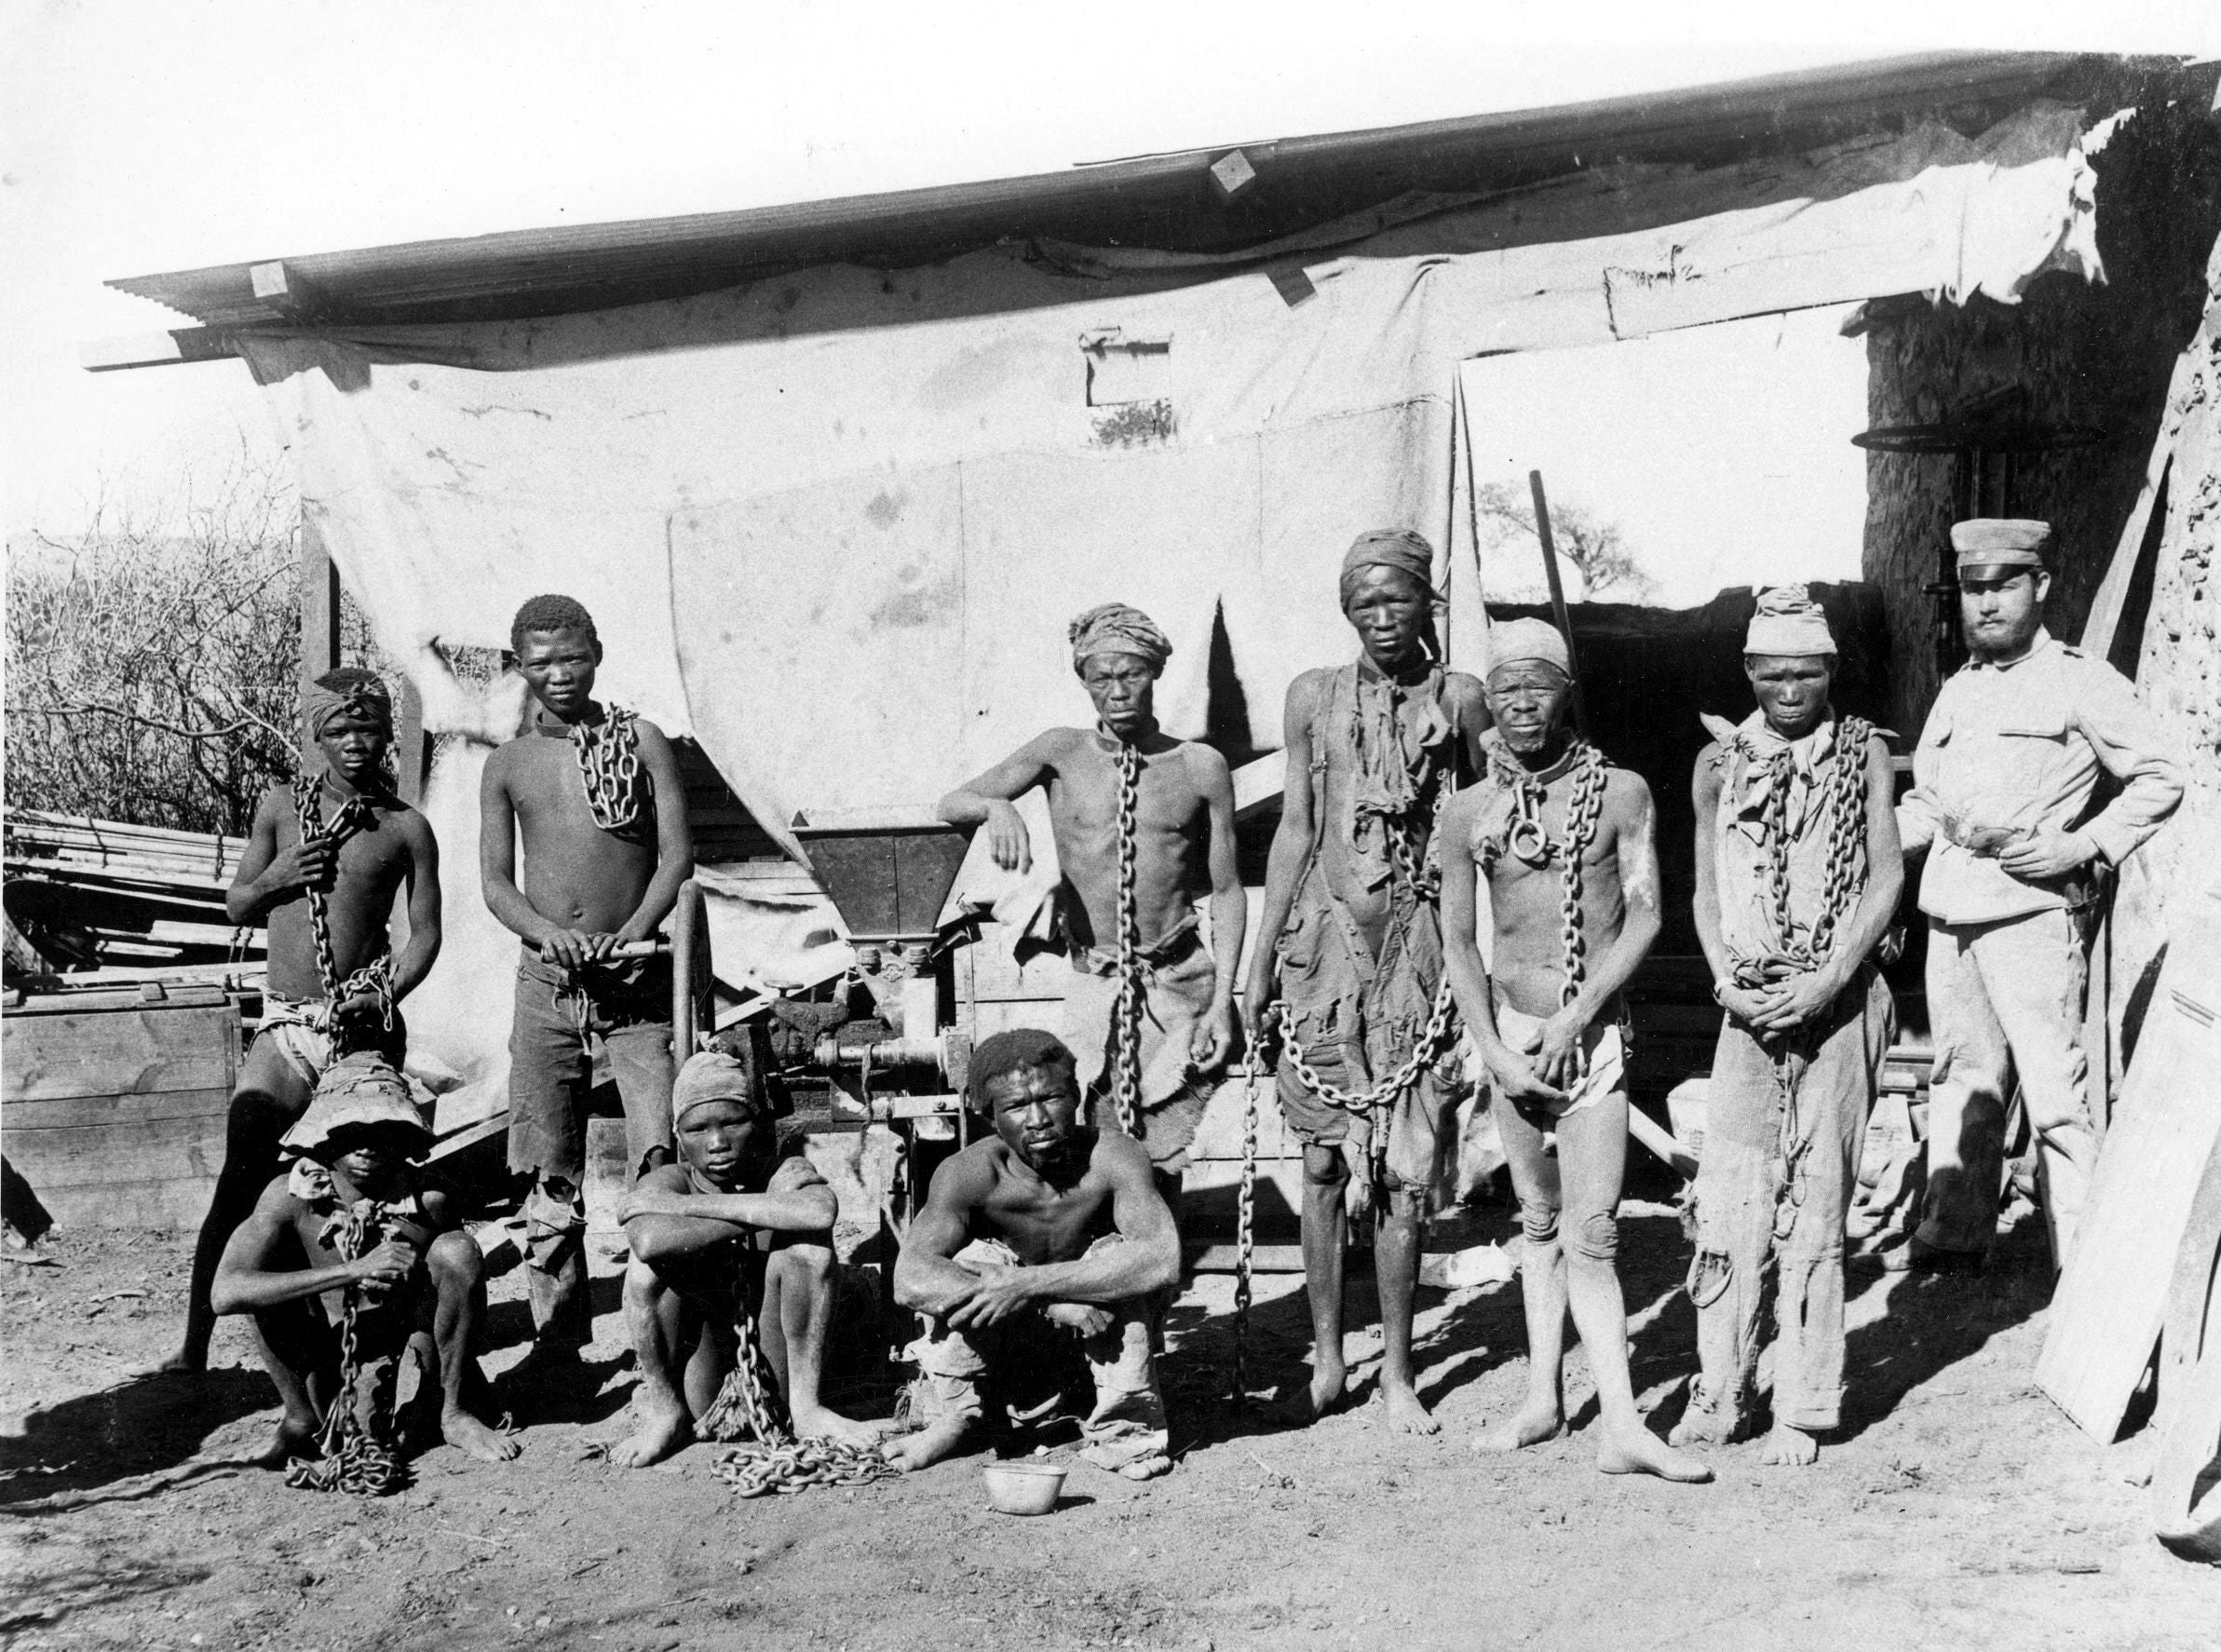 This undated photo, taken during the 1904-1908 genocide in Namibia, shows what is thought to be a German soldier supervising Namibian war prisoners